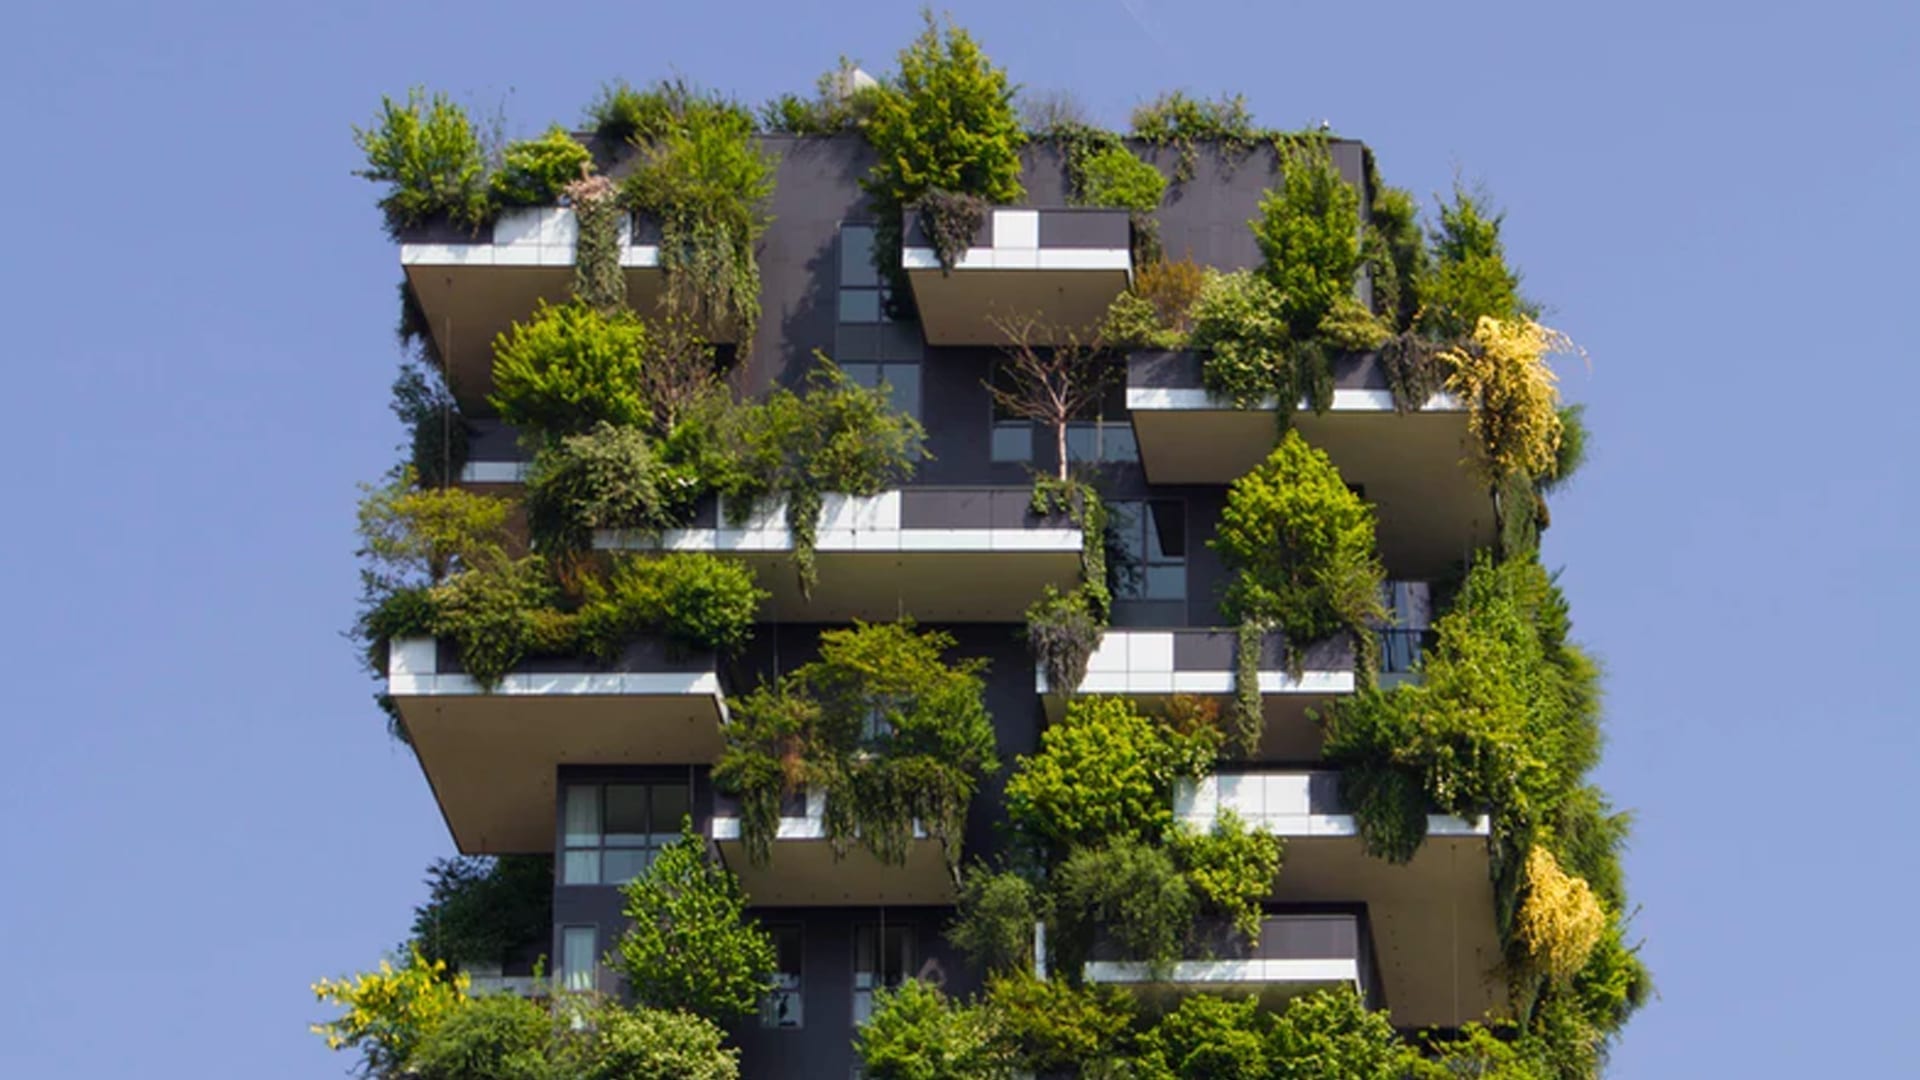 Why We’re Optimistic This Earth Day - High-rise building covered with plants